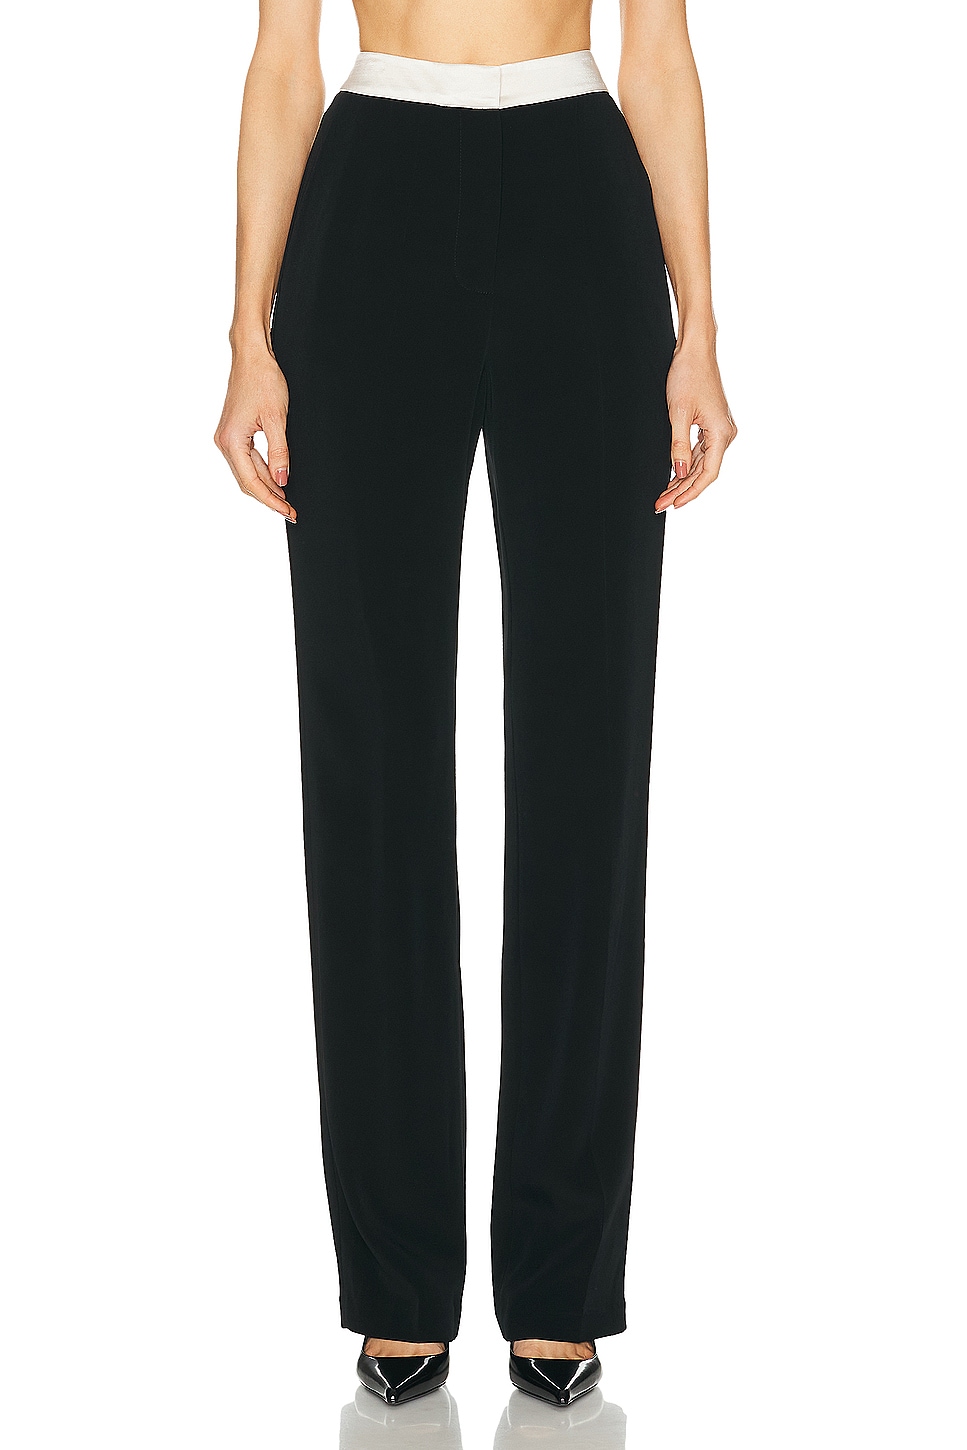 Image 1 of GALVAN High Waisted Suit Trouser in Black & Ivory